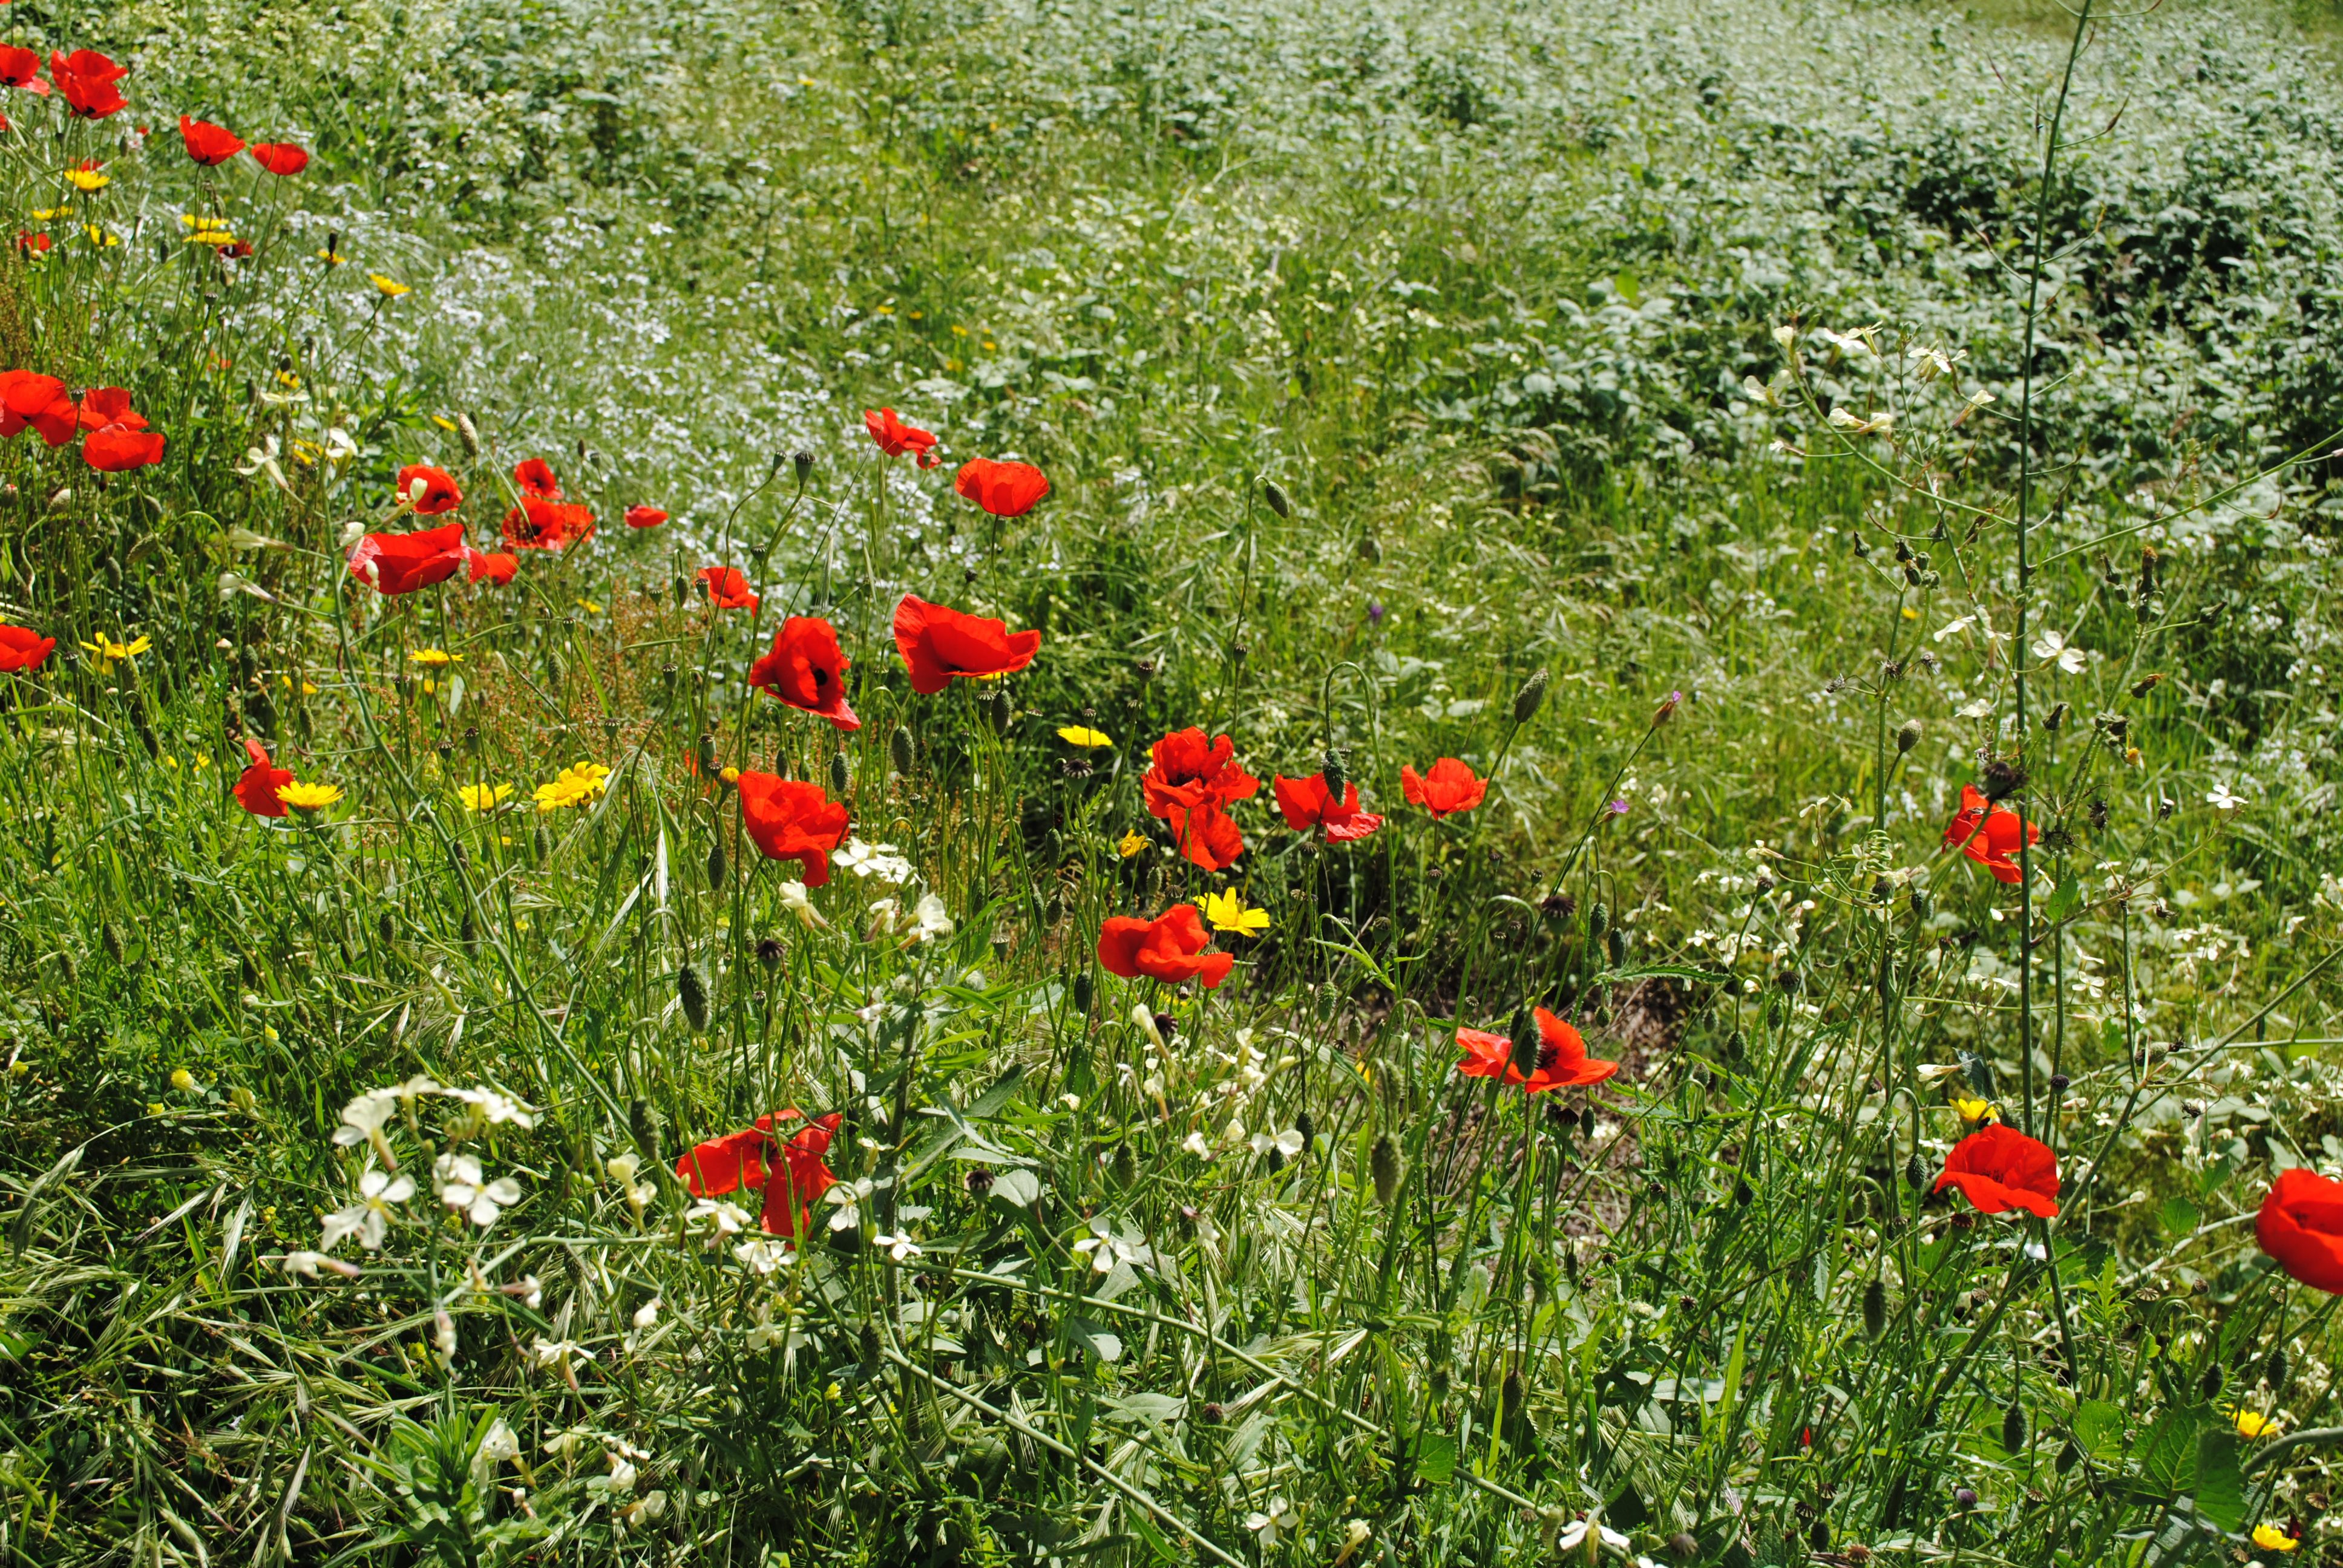 Tuscany in bloom: wild poppies in the olive grove | Floral ...